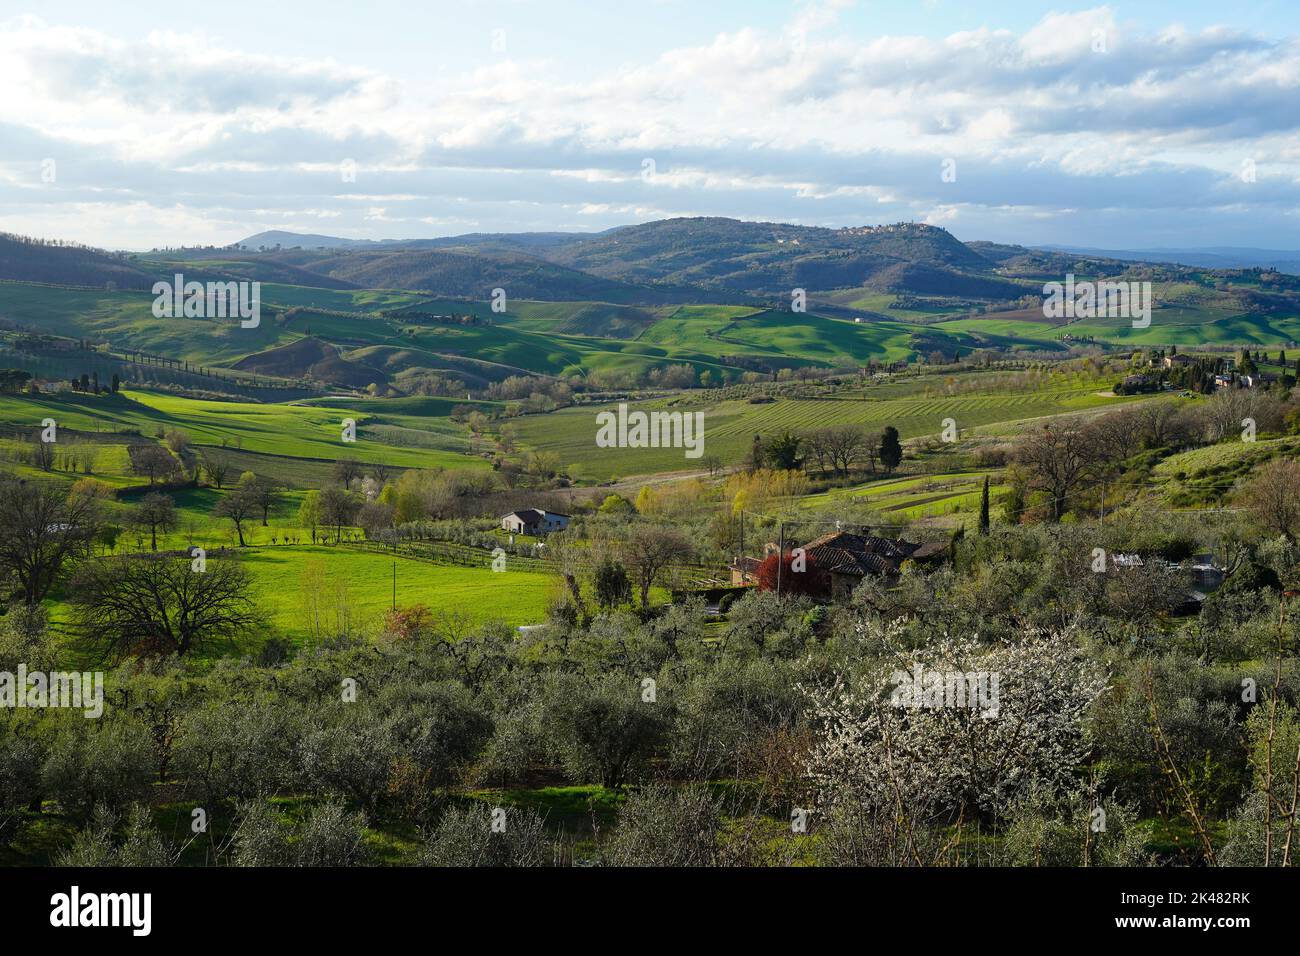 Rolling hills in the Tuscan countryside near Montepulciano Stock Photo